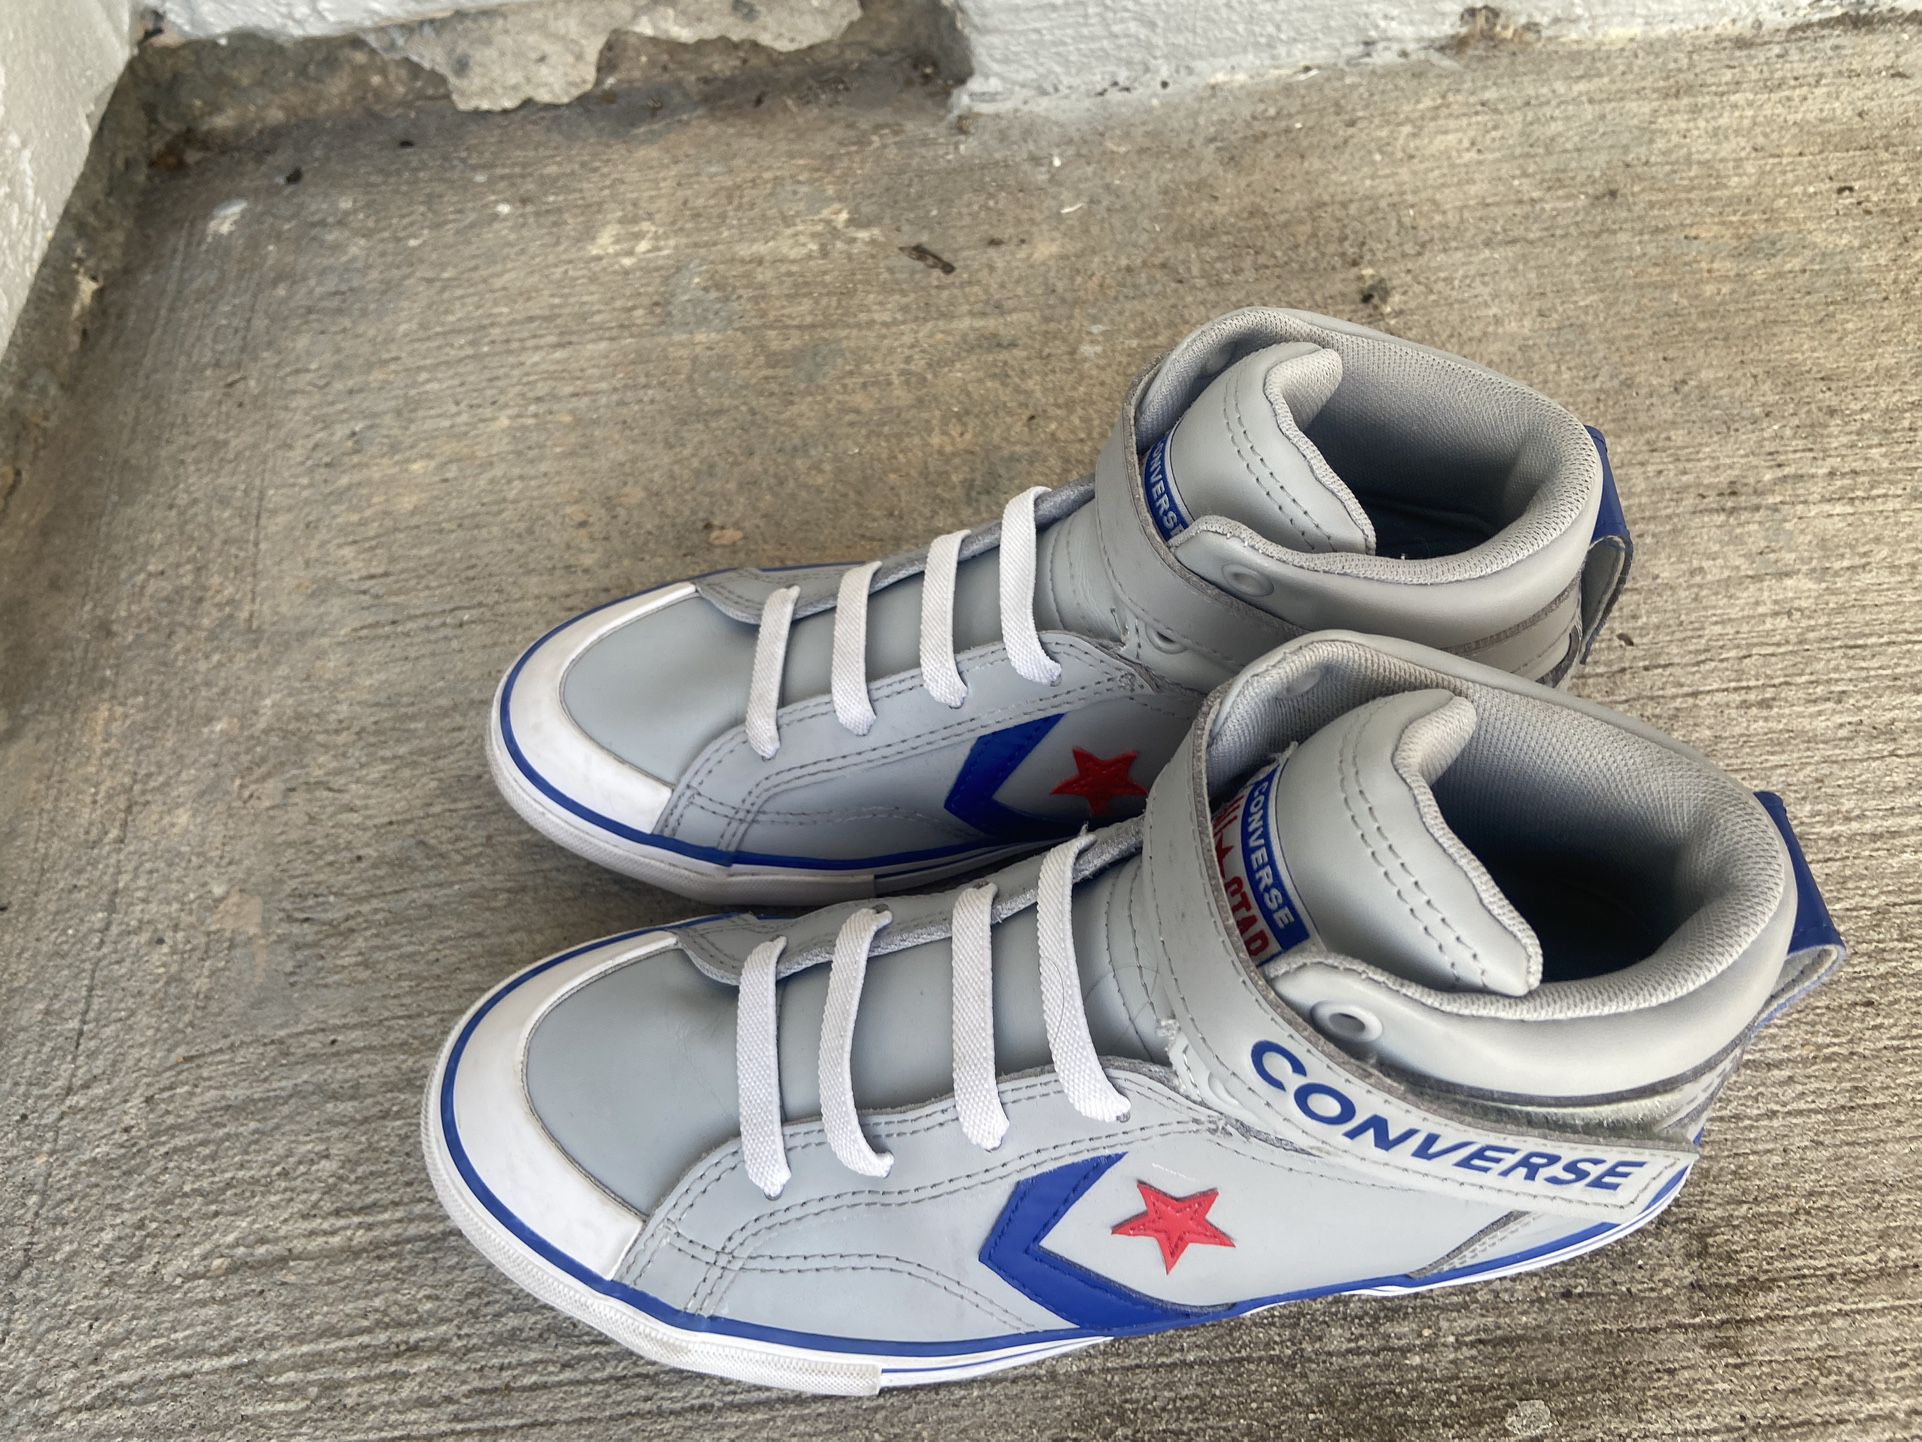 Converse Sneakers Size 4